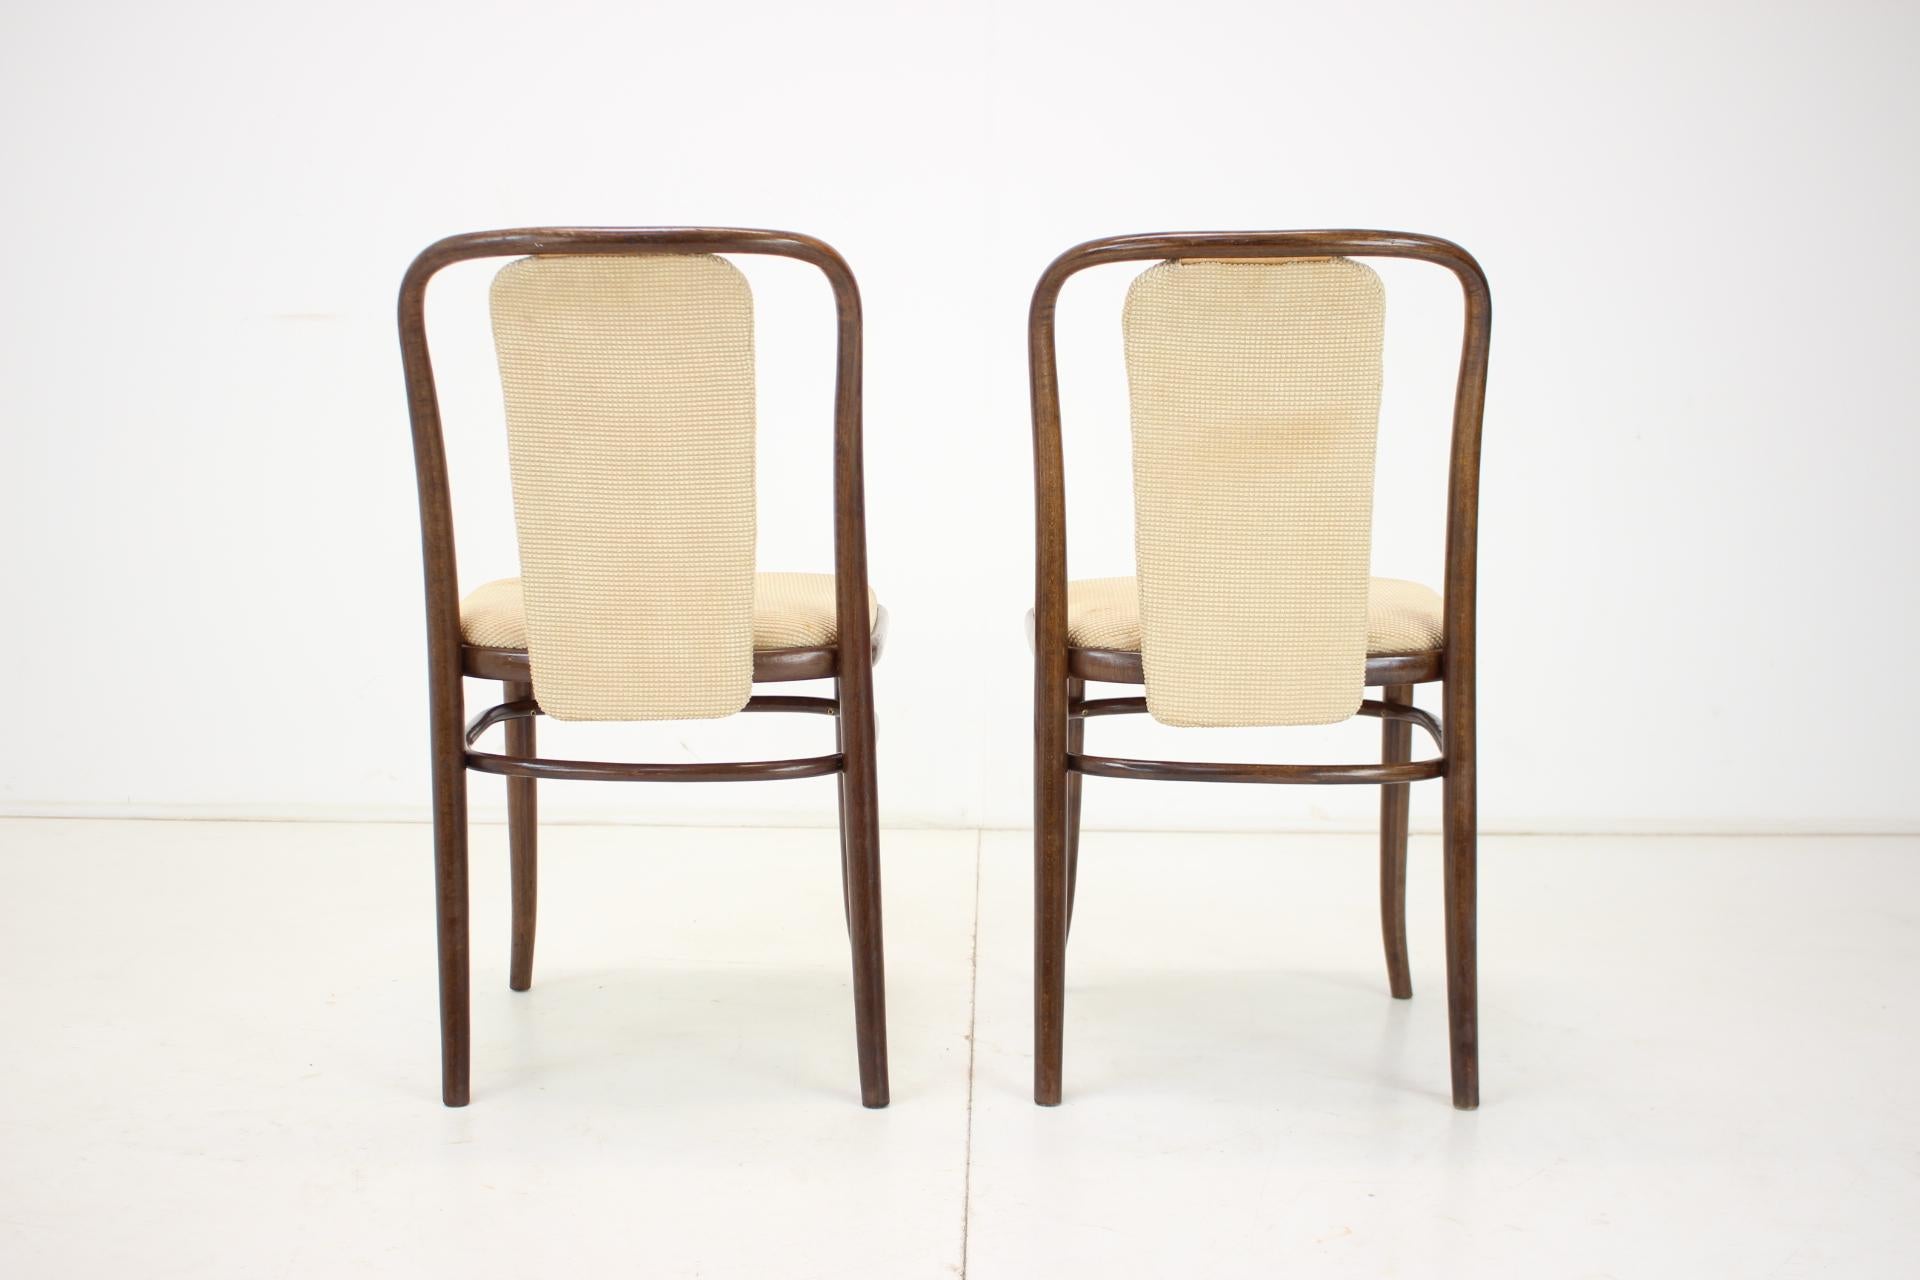 Fabric Set of Two Bentwood Chairs, Ton, 1980s For Sale